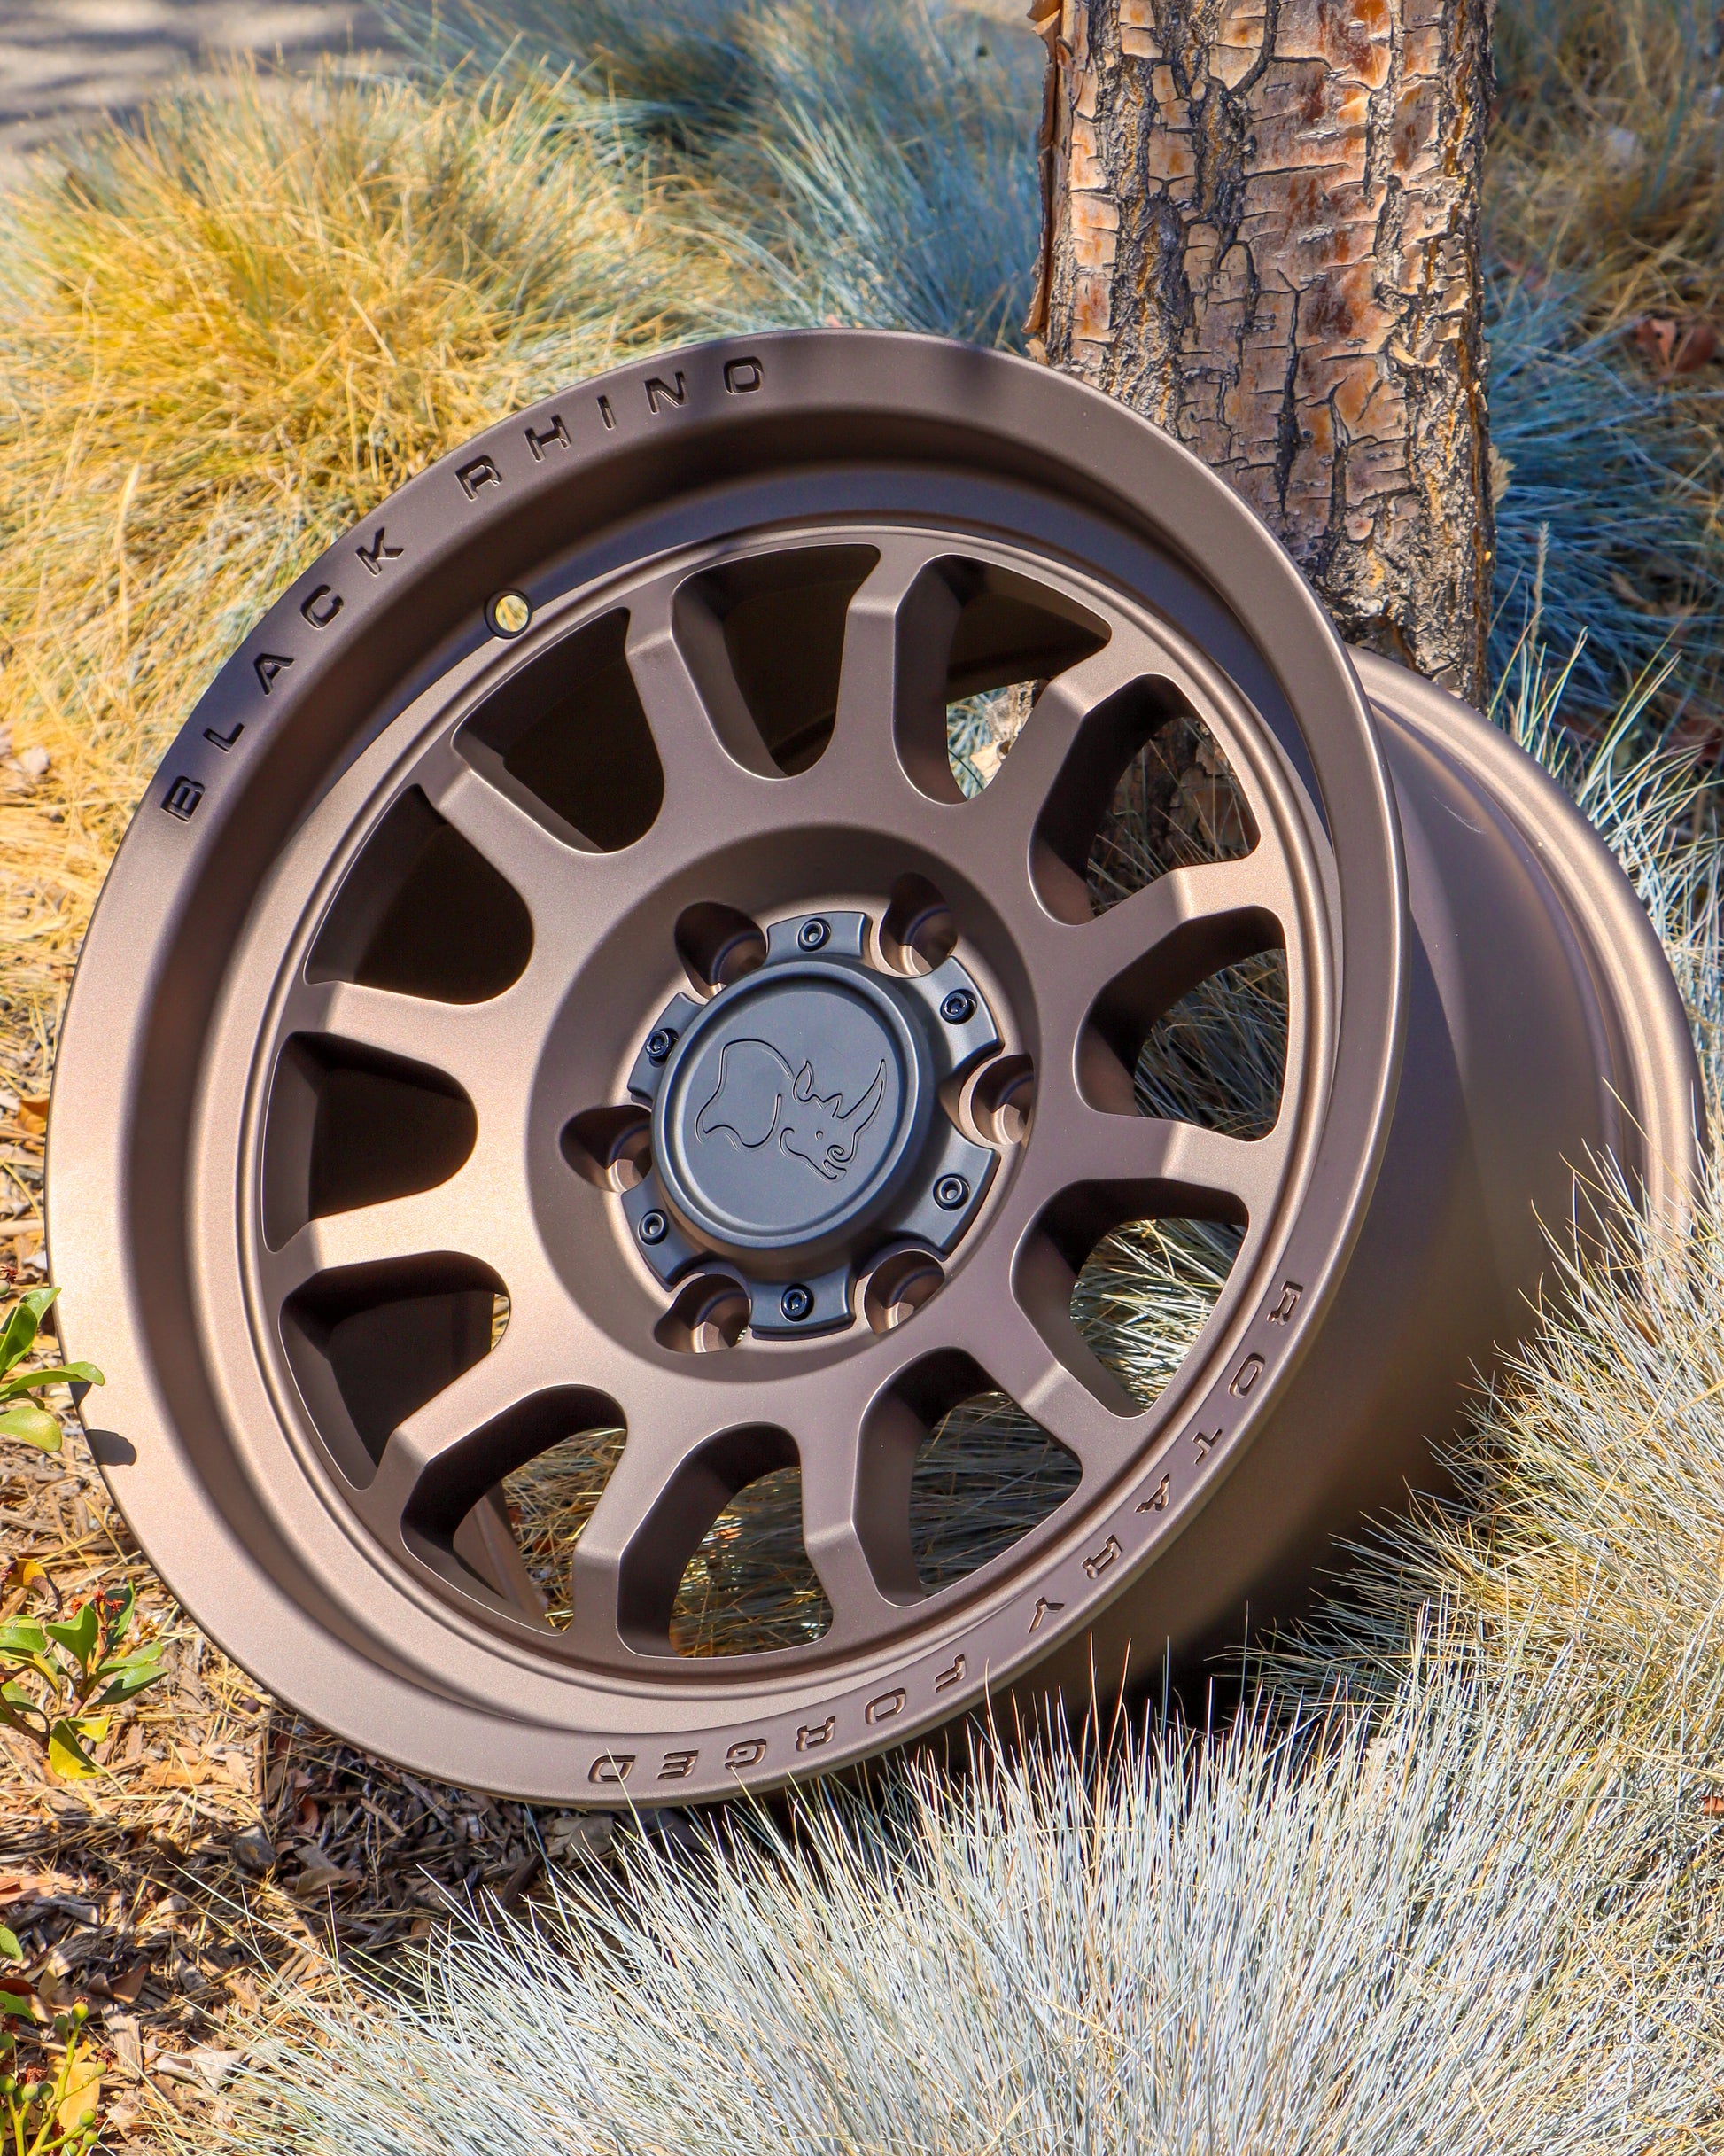 Black Rhino Rapid Wheel with a Matte Bronze finish, on the ground leaning against a tree.